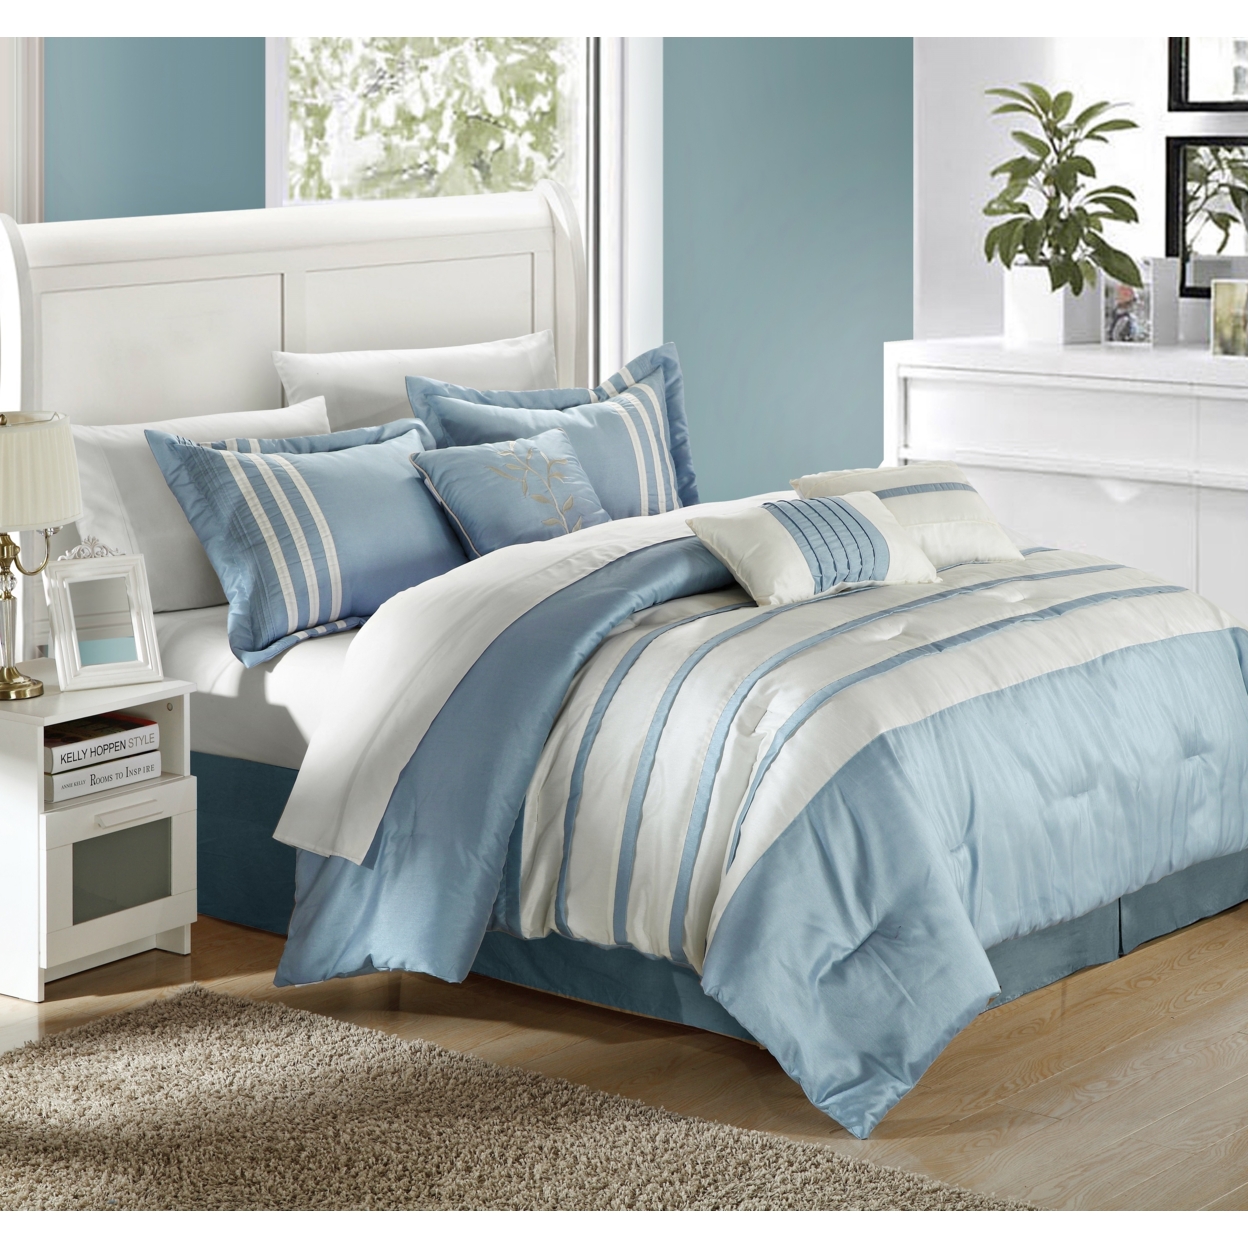 Therry Pleated Piecing Luxury Bedding Collection 7-Piece Comforter Set - Blue, King